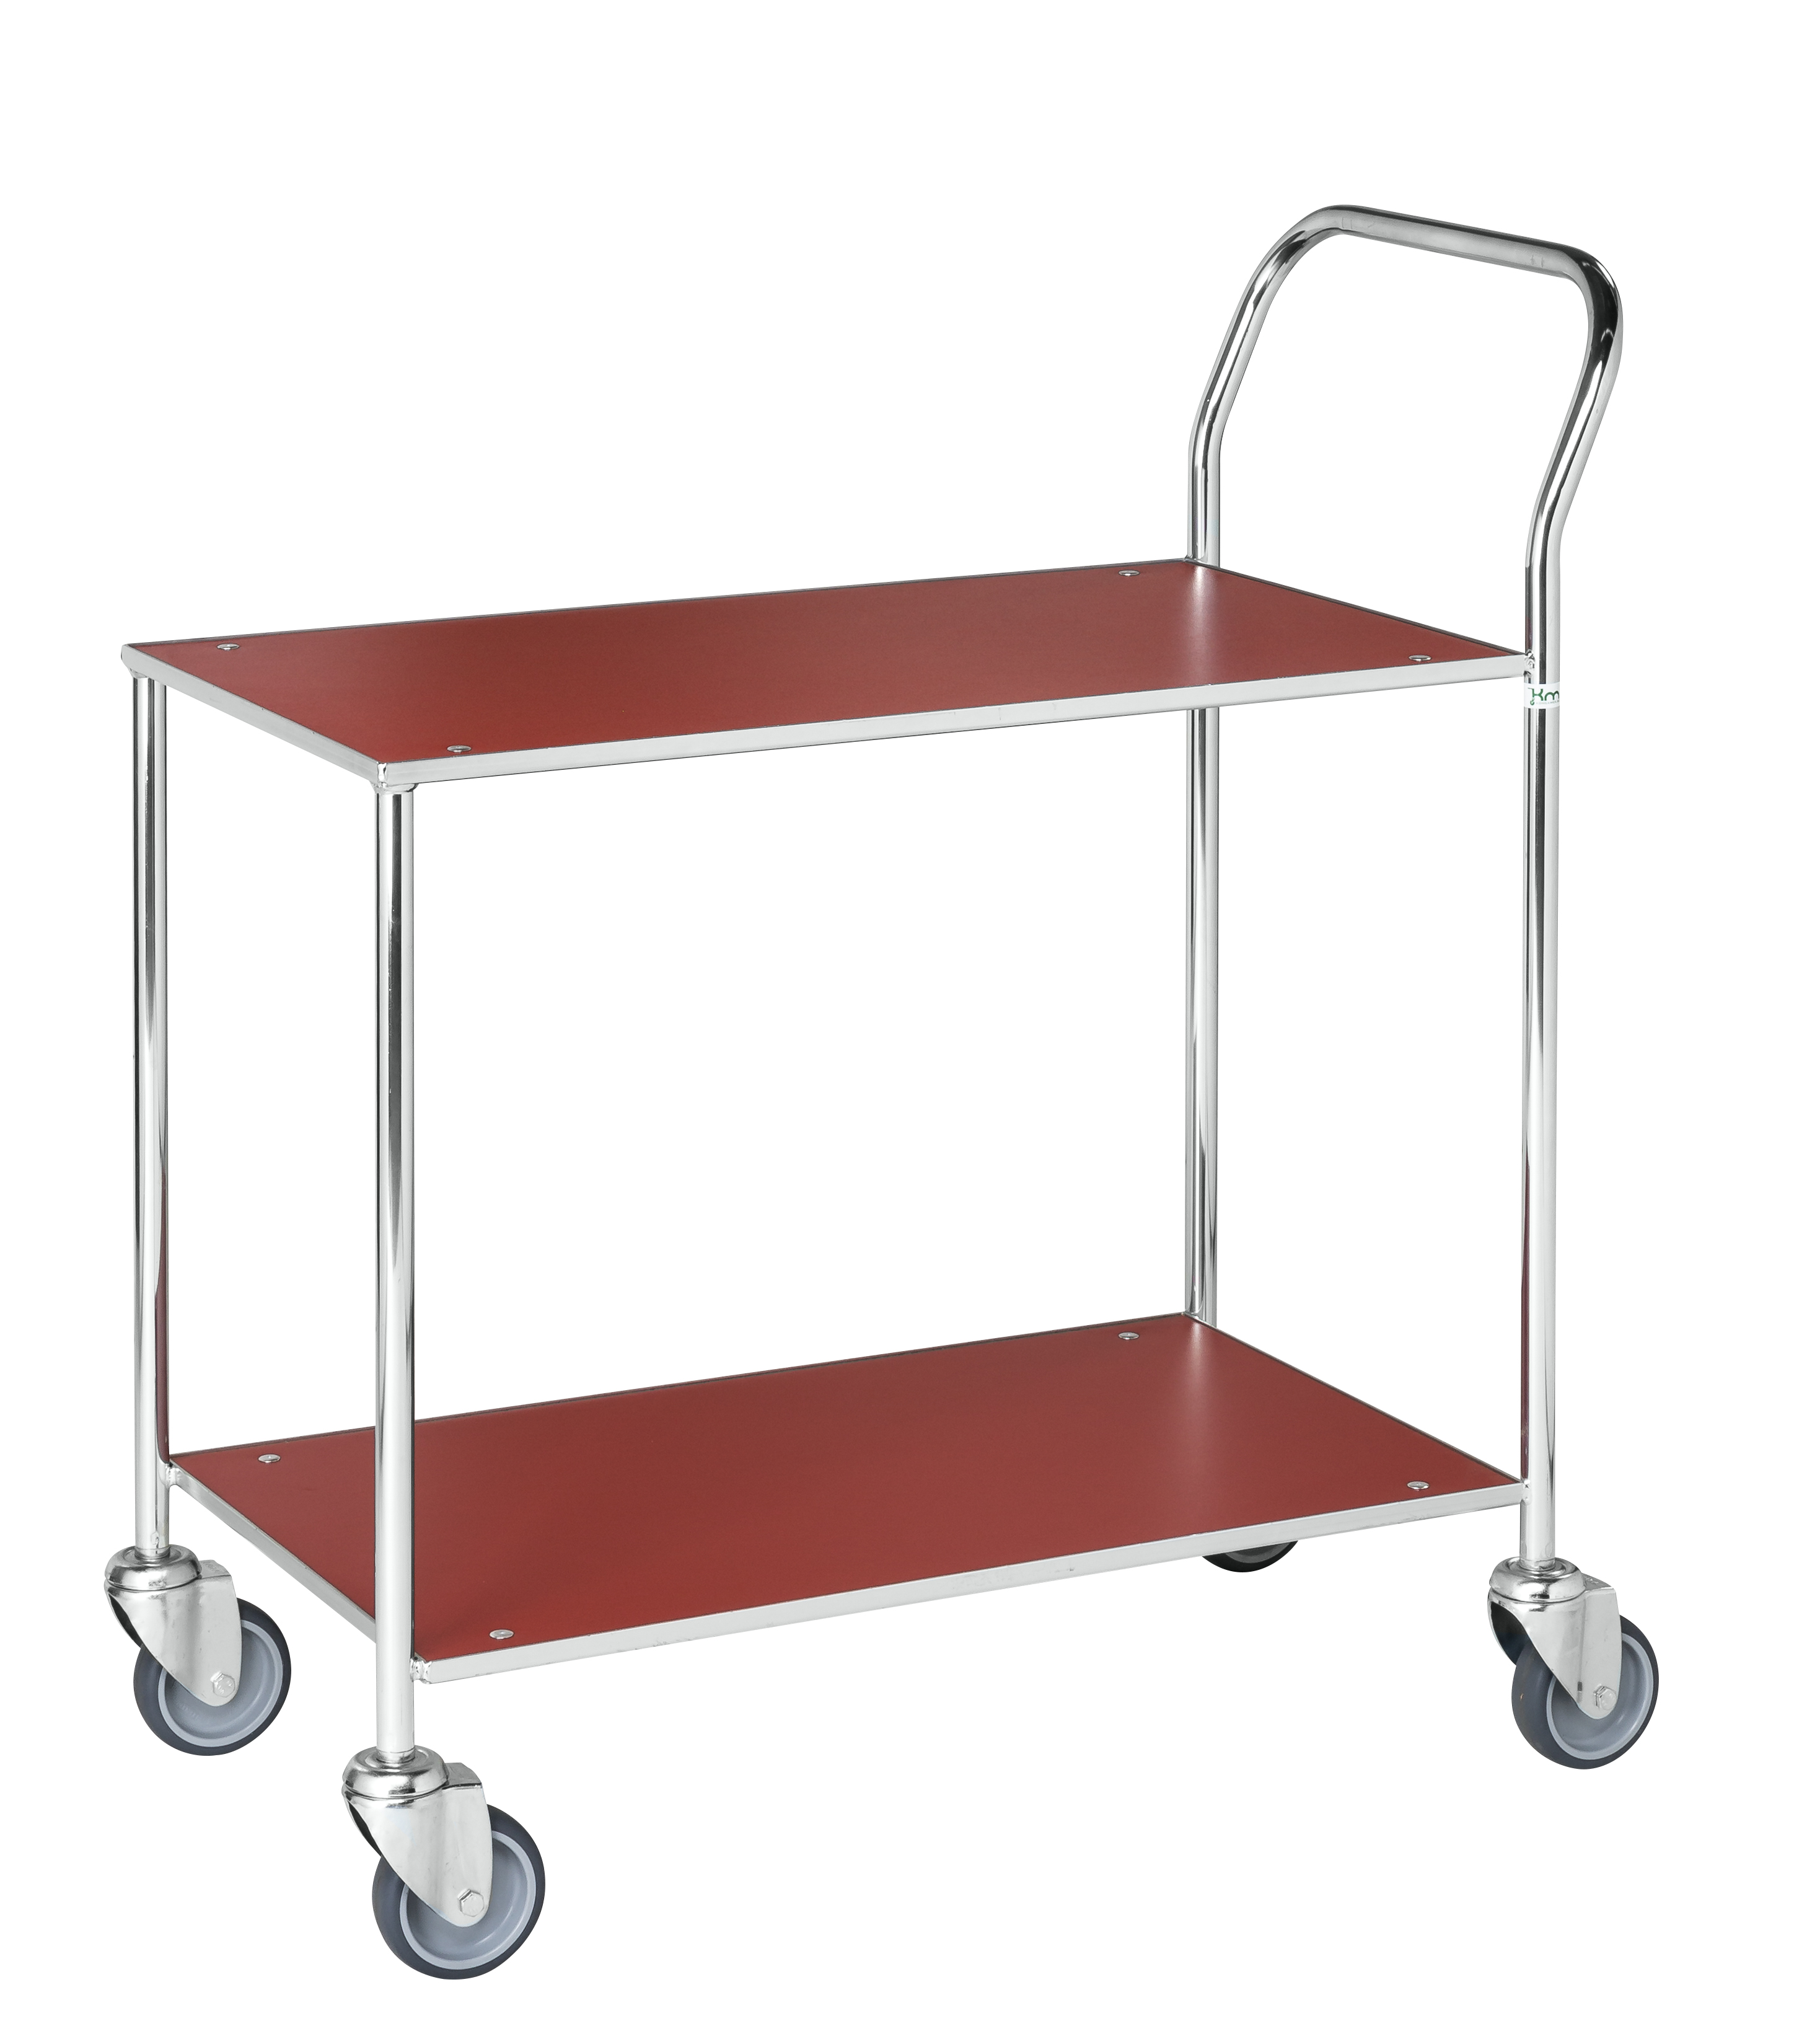 Small table trolley, fully welded KM172-1B